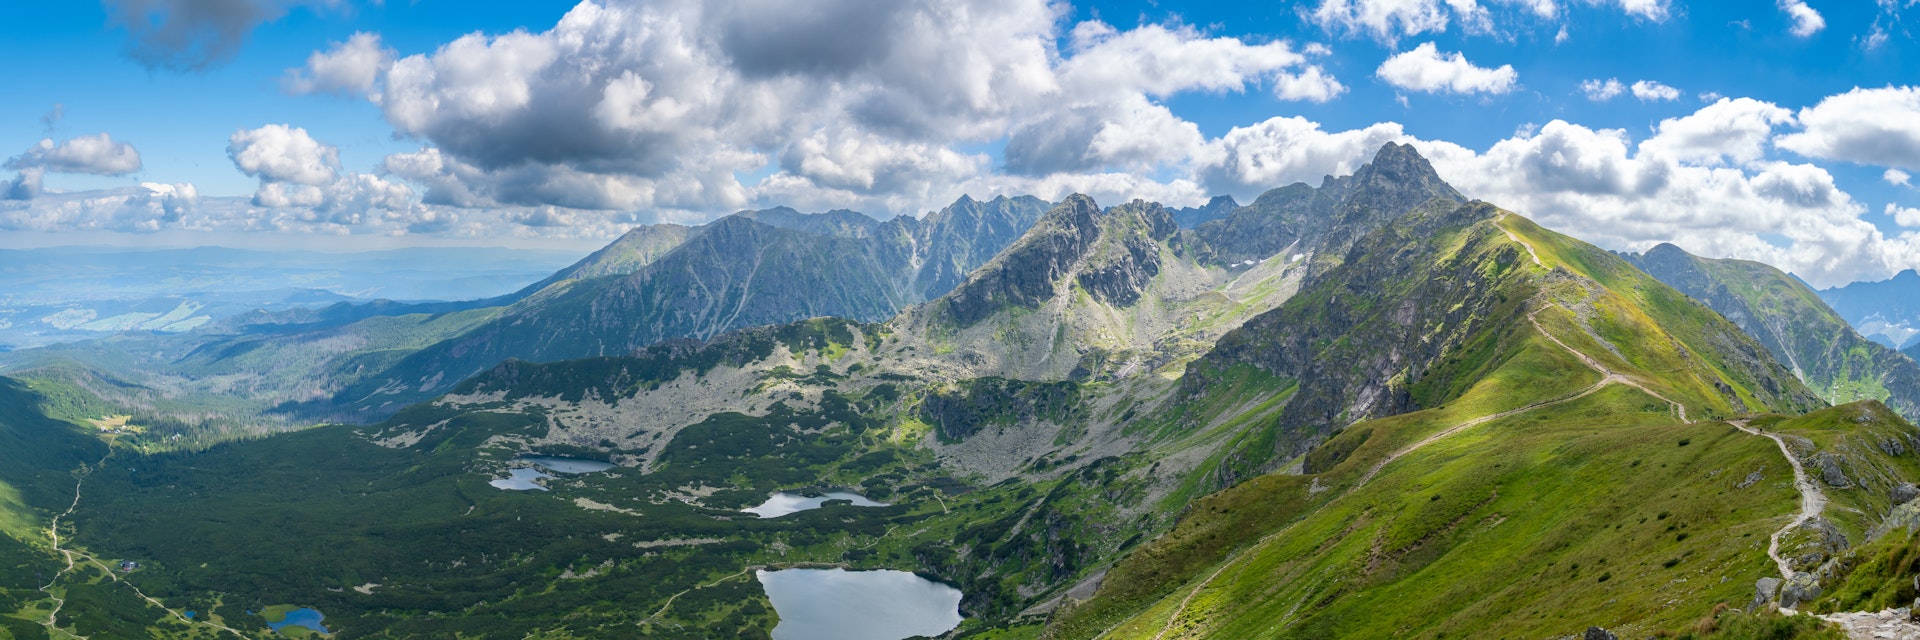 amazing high Tatra mountains during summer in Poland
1657465139